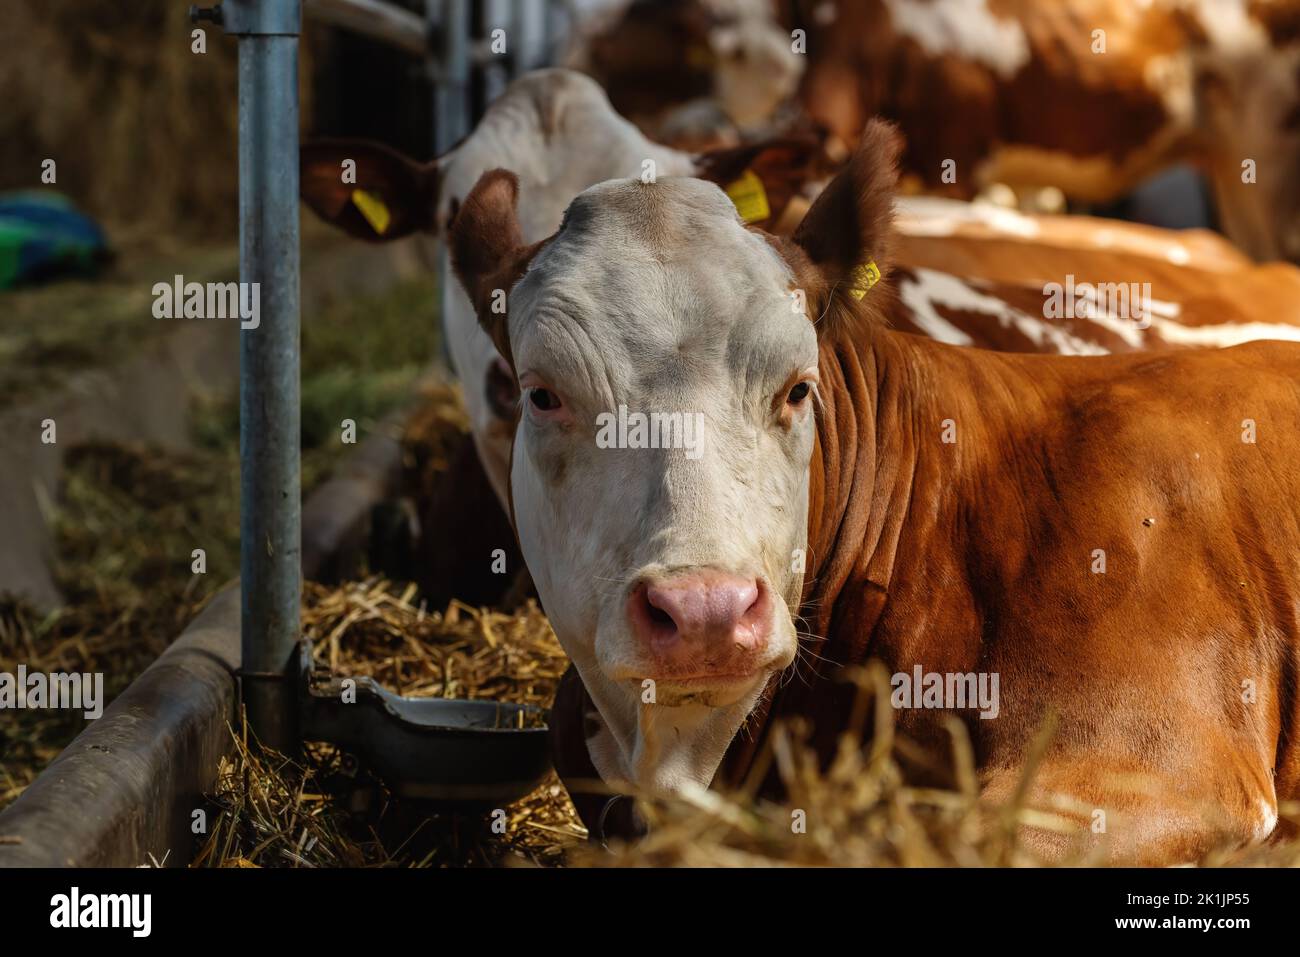 Holstein Friesian cattle on dairy farm known for high milk production, selective focus Stock Photo